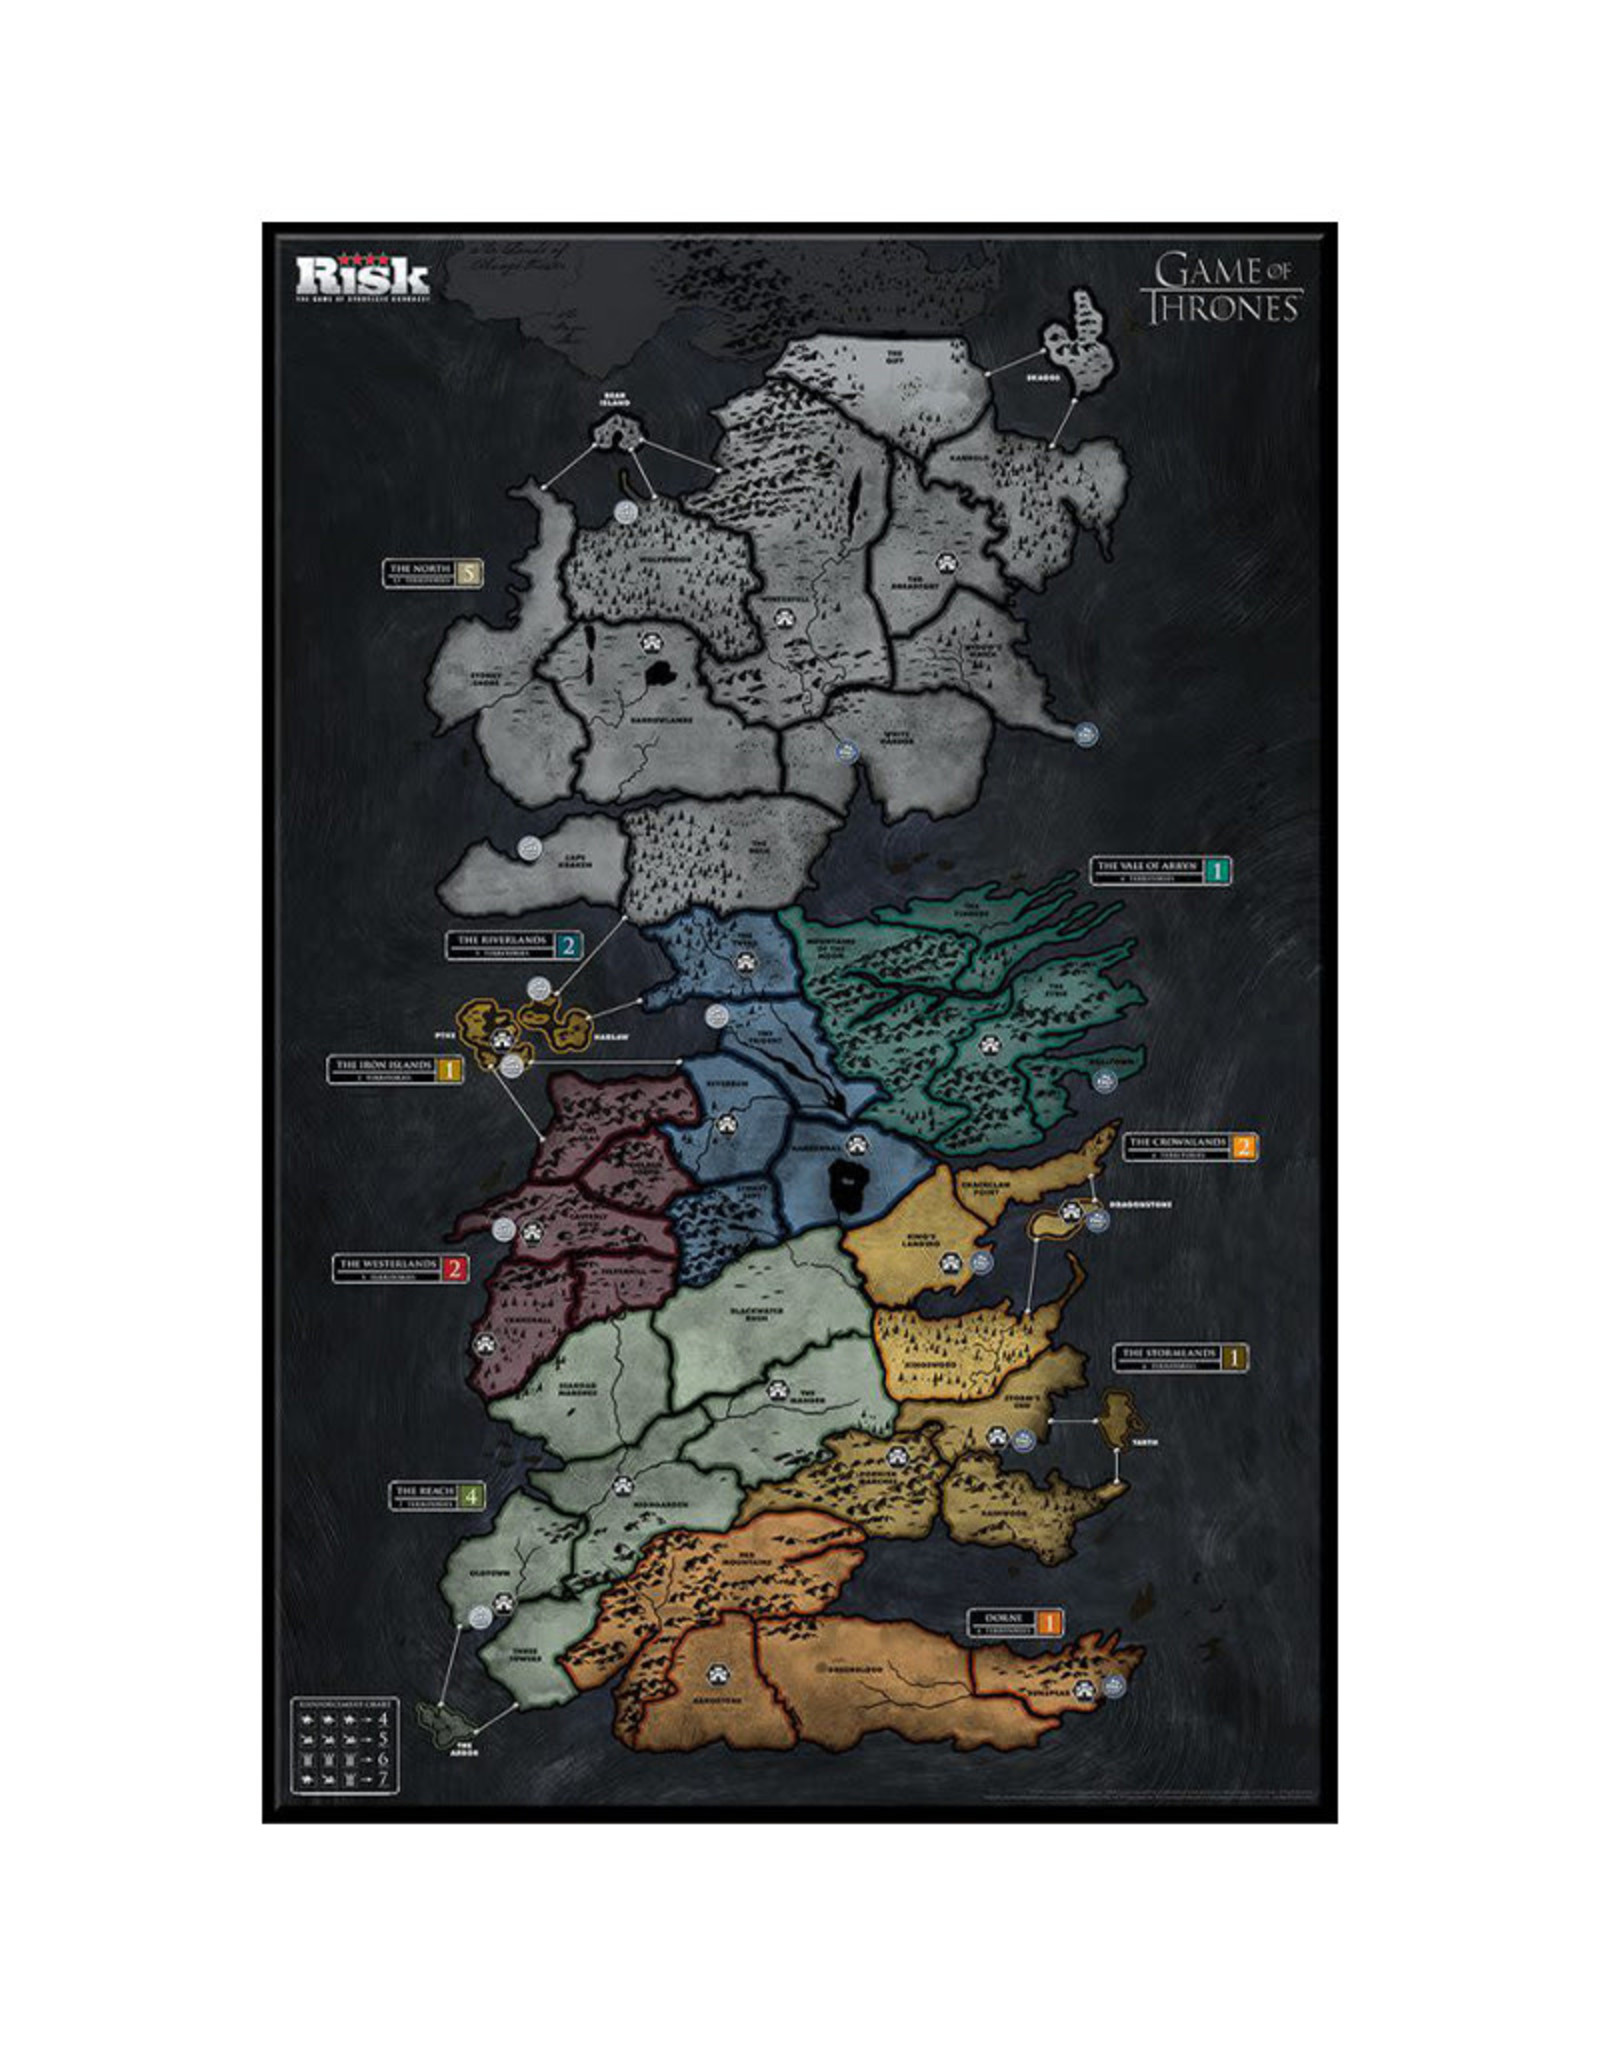 USAopoly Risk: Game of Thrones